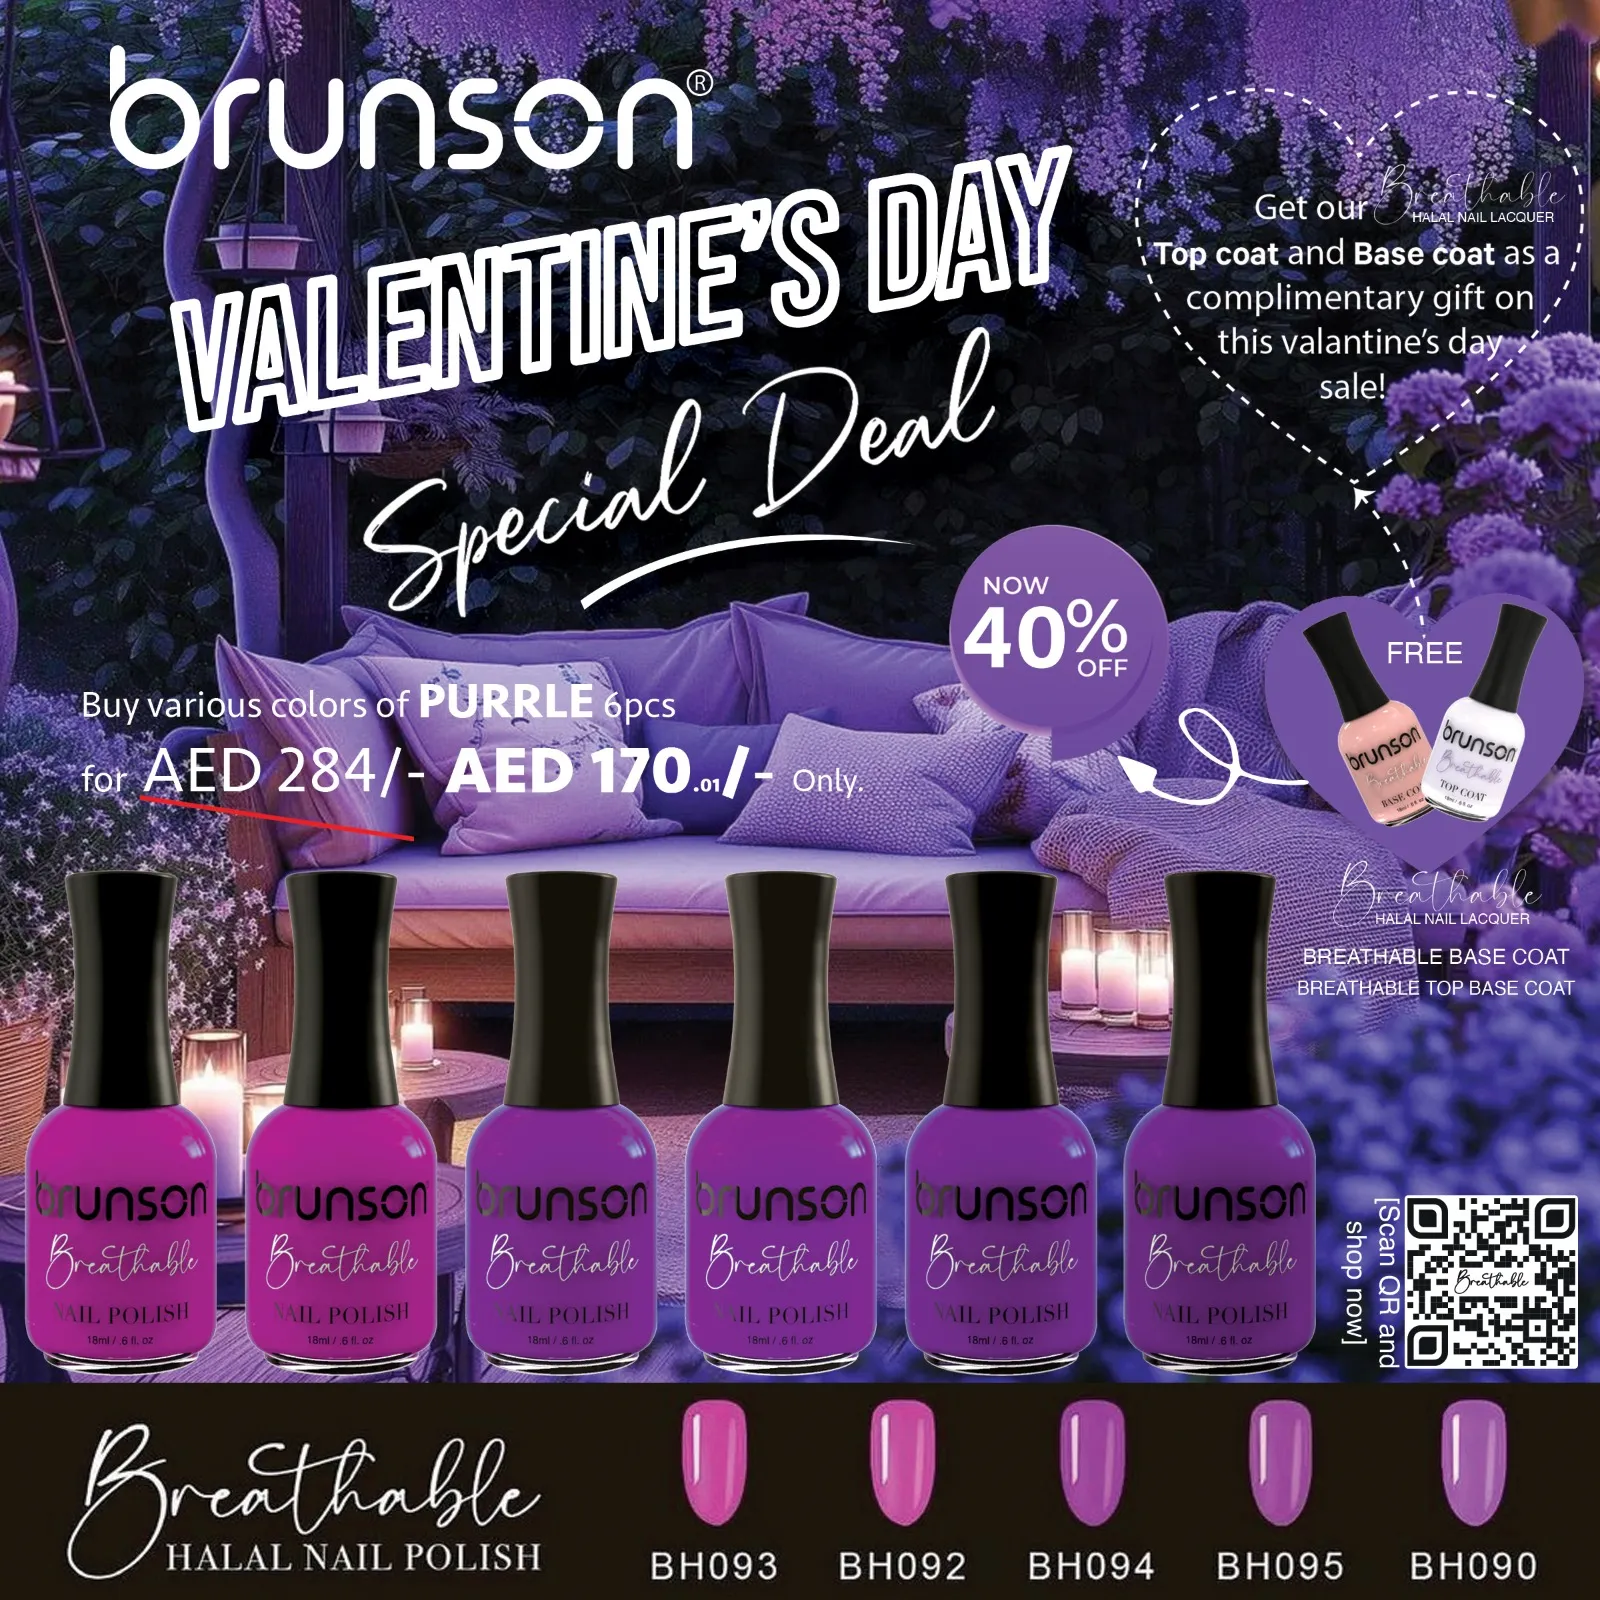 Breathable valentines day offer